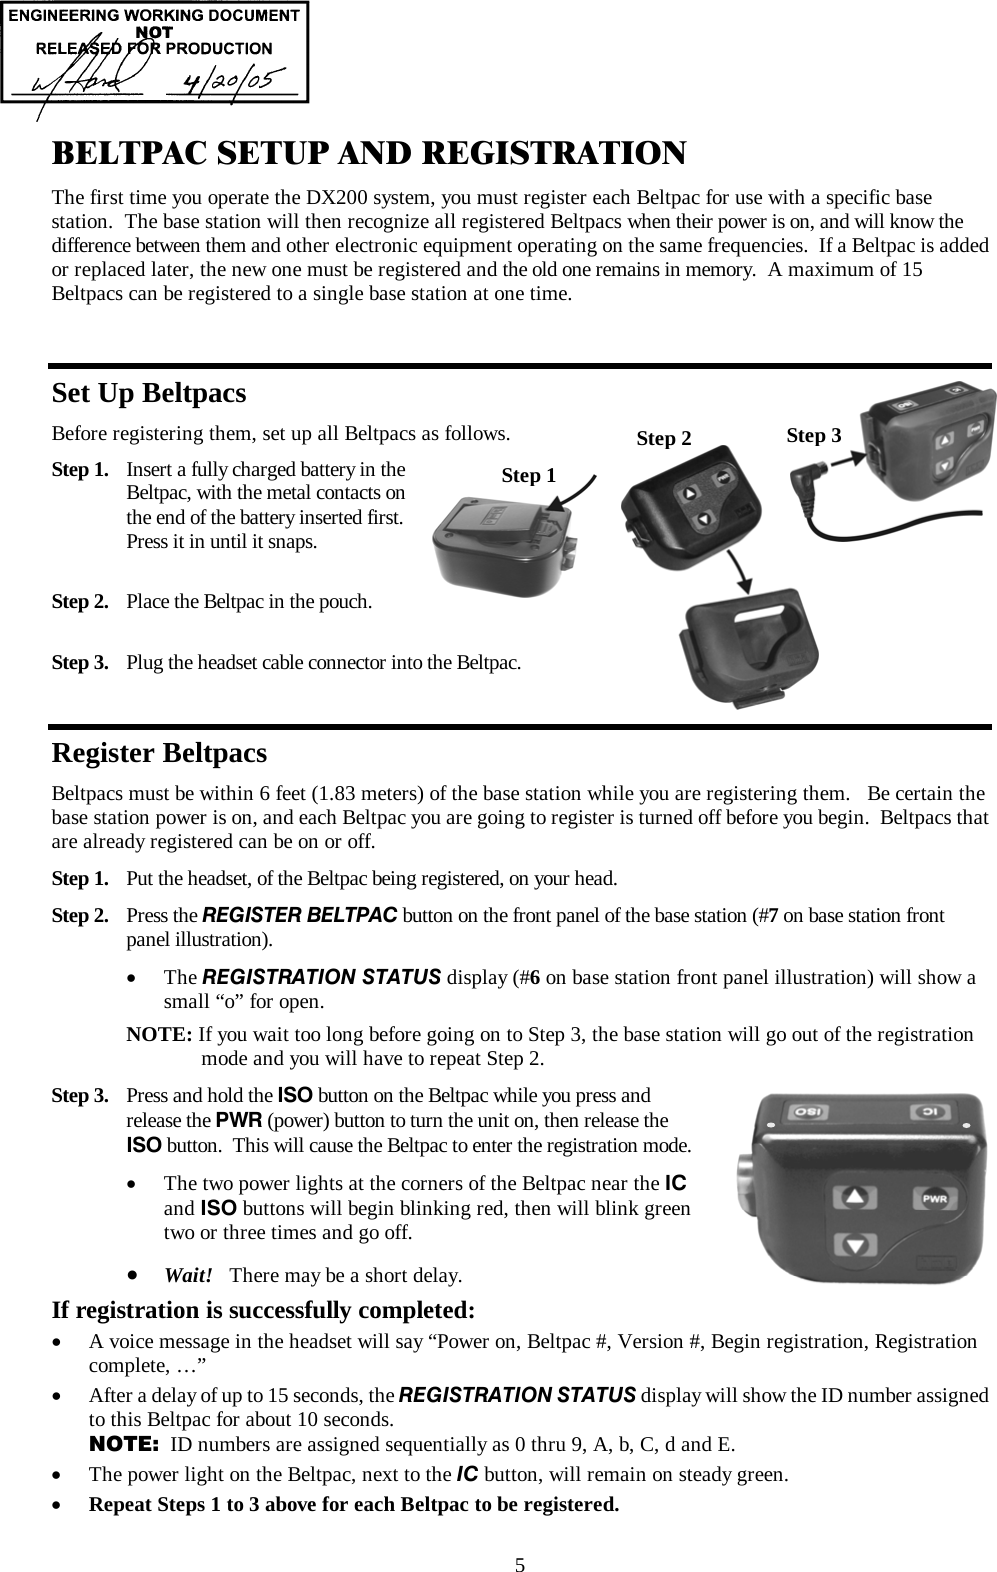  5 BELTPAC SETUP AND REGISTRATION The first time you operate the DX200 system, you must register each Beltpac for use with a specific base station.  The base station will then recognize all registered Beltpacs when their power is on, and will know the difference between them and other electronic equipment operating on the same frequencies.  If a Beltpac is added or replaced later, the new one must be registered and the old one remains in memory.  A maximum of 15 Beltpacs can be registered to a single base station at one time.  Set Up Beltpacs Before registering them, set up all Beltpacs as follows. Step 1.  Insert a fully charged battery in the     Beltpac, with the metal contacts on    the end of the battery inserted first.    Press it in until it snaps.  Step 2.  Place the Beltpac in the pouch.  Step 3.  Plug the headset cable connector into the Beltpac.  Register Beltpacs Beltpacs must be within 6 feet (1.83 meters) of the base station while you are registering them.   Be certain the base station power is on, and each Beltpac you are going to register is turned off before you begin.  Beltpacs that are already registered can be on or off. Step 1.  Put the headset, of the Beltpac being registered, on your head. Step 2.  Press the REGISTER BELTPAC button on the front panel of the base station (#7 on base station front panel illustration).  •  The REGISTRATION STATUS display (#6 on base station front panel illustration) will show a small “o” for open.  NOTE: If you wait too long before going on to Step 3, the base station will go out of the registration       mode and you will have to repeat Step 2. Step 3.  Press and hold the ISO button on the Beltpac while you press and  release the PWR (power) button to turn the unit on, then release the ISO button.  This will cause the Beltpac to enter the registration mode.  •  The two power lights at the corners of the Beltpac near the IC  and ISO buttons will begin blinking red, then will blink green  two or three times and go off.  •  Wait!   There may be a short delay. If registration is successfully completed: •  A voice message in the headset will say “Power on, Beltpac #, Version #, Begin registration, Registration complete, …” •  After a delay of up to 15 seconds, the REGISTRATION STATUS display will show the ID number assigned to this Beltpac for about 10 seconds. NOTE:  ID numbers are assigned sequentially as 0 thru 9, A, b, C, d and E. •  The power light on the Beltpac, next to the IC button, will remain on steady green. •  Repeat Steps 1 to 3 above for each Beltpac to be registered.  Step 1 Step 2  Step 3 